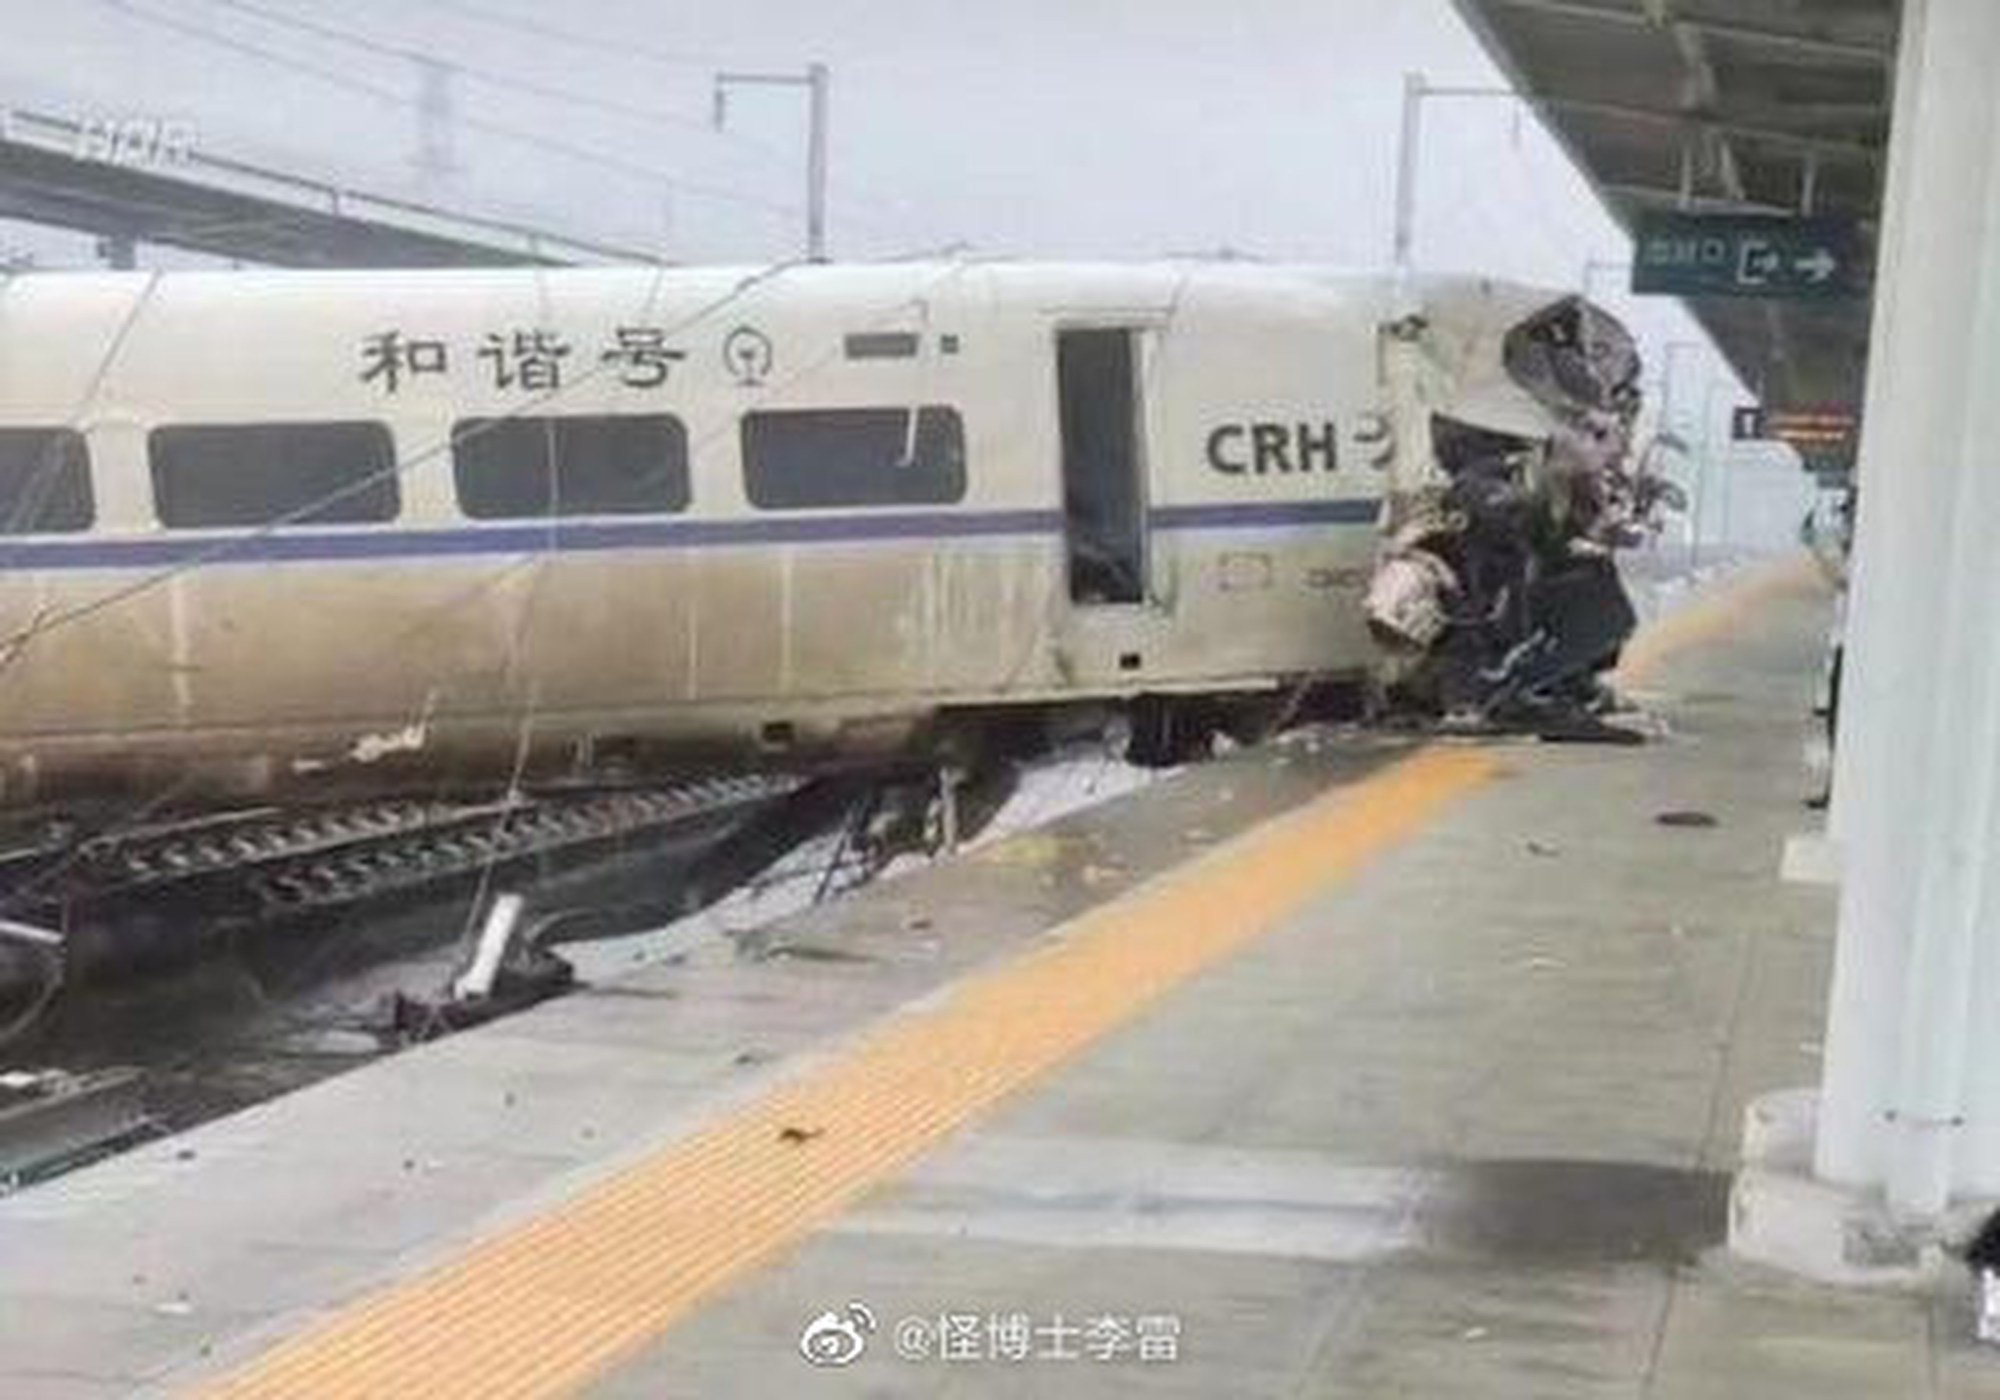 The high-speed train came off the tracks after hitting soil on the rails on Saturday. Photo: Weibo